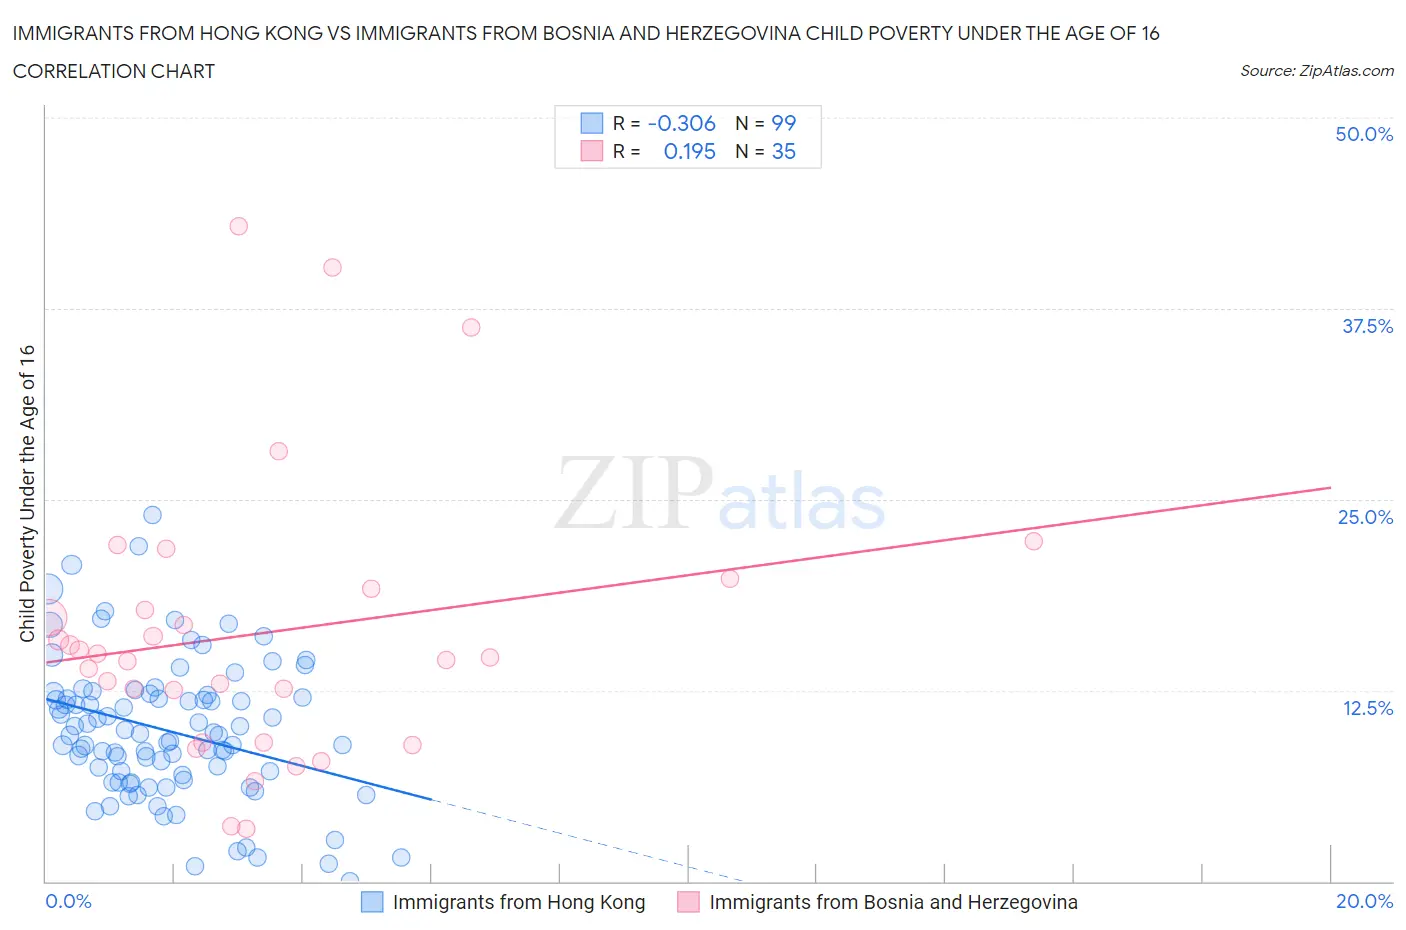 Immigrants from Hong Kong vs Immigrants from Bosnia and Herzegovina Child Poverty Under the Age of 16